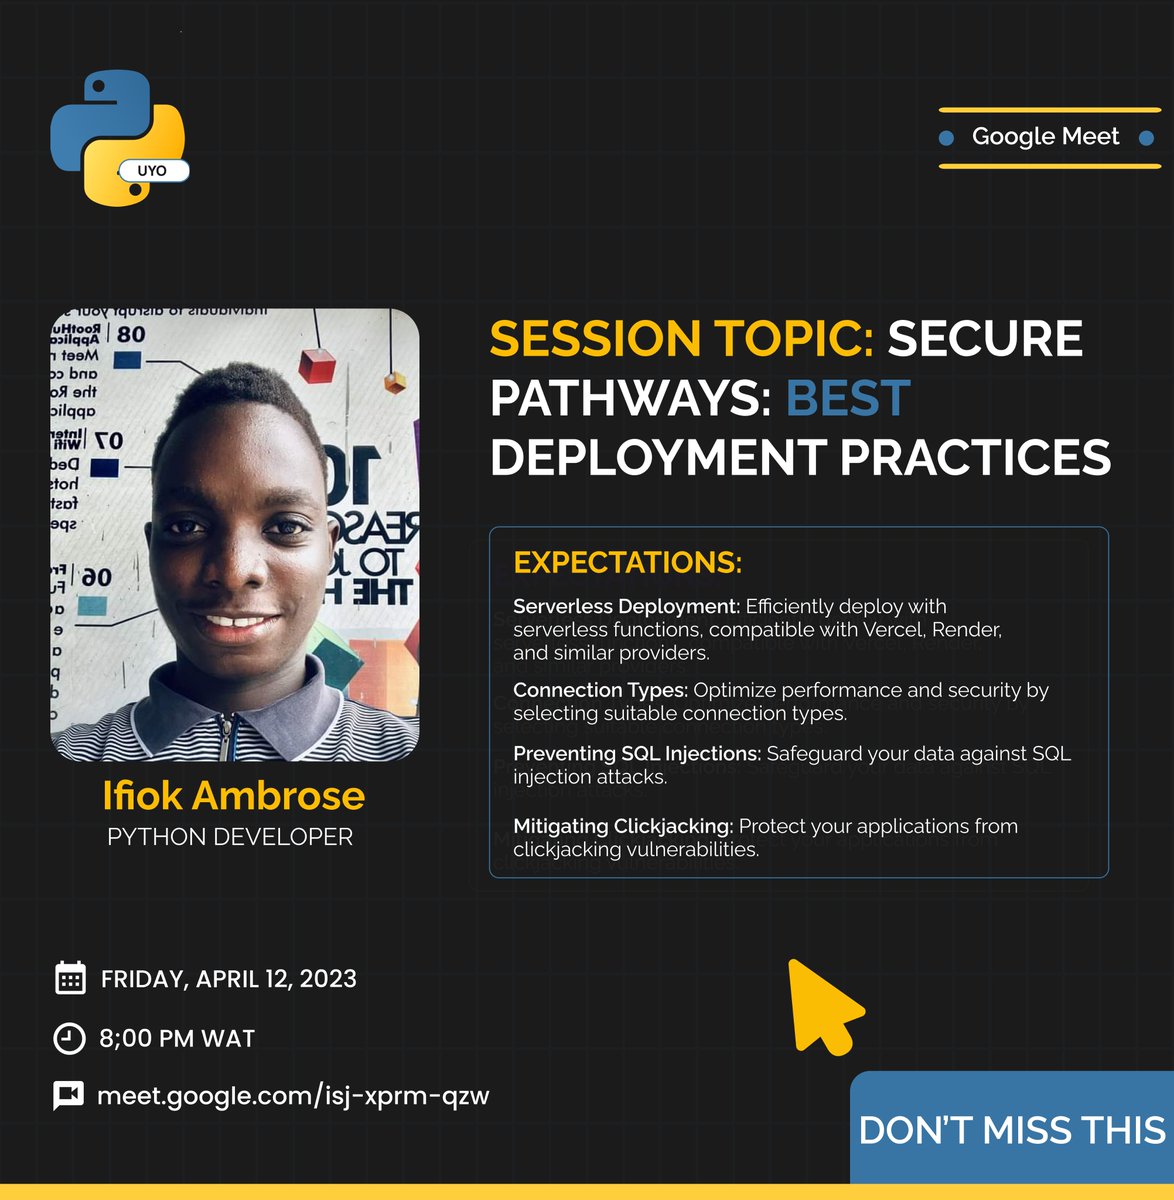 REMINDER: Secure Pathways: Best Deployment Practices
Calling all Python developers! 

Don't miss out! 
Venue: meet.google.com/isj-xprm-qzw

See you there !
Join our community: chat.whatsapp.com/E8Zc00I7BMU85E…

#WebSecurity #DeploymentStrategies #pythonuyo #python #django